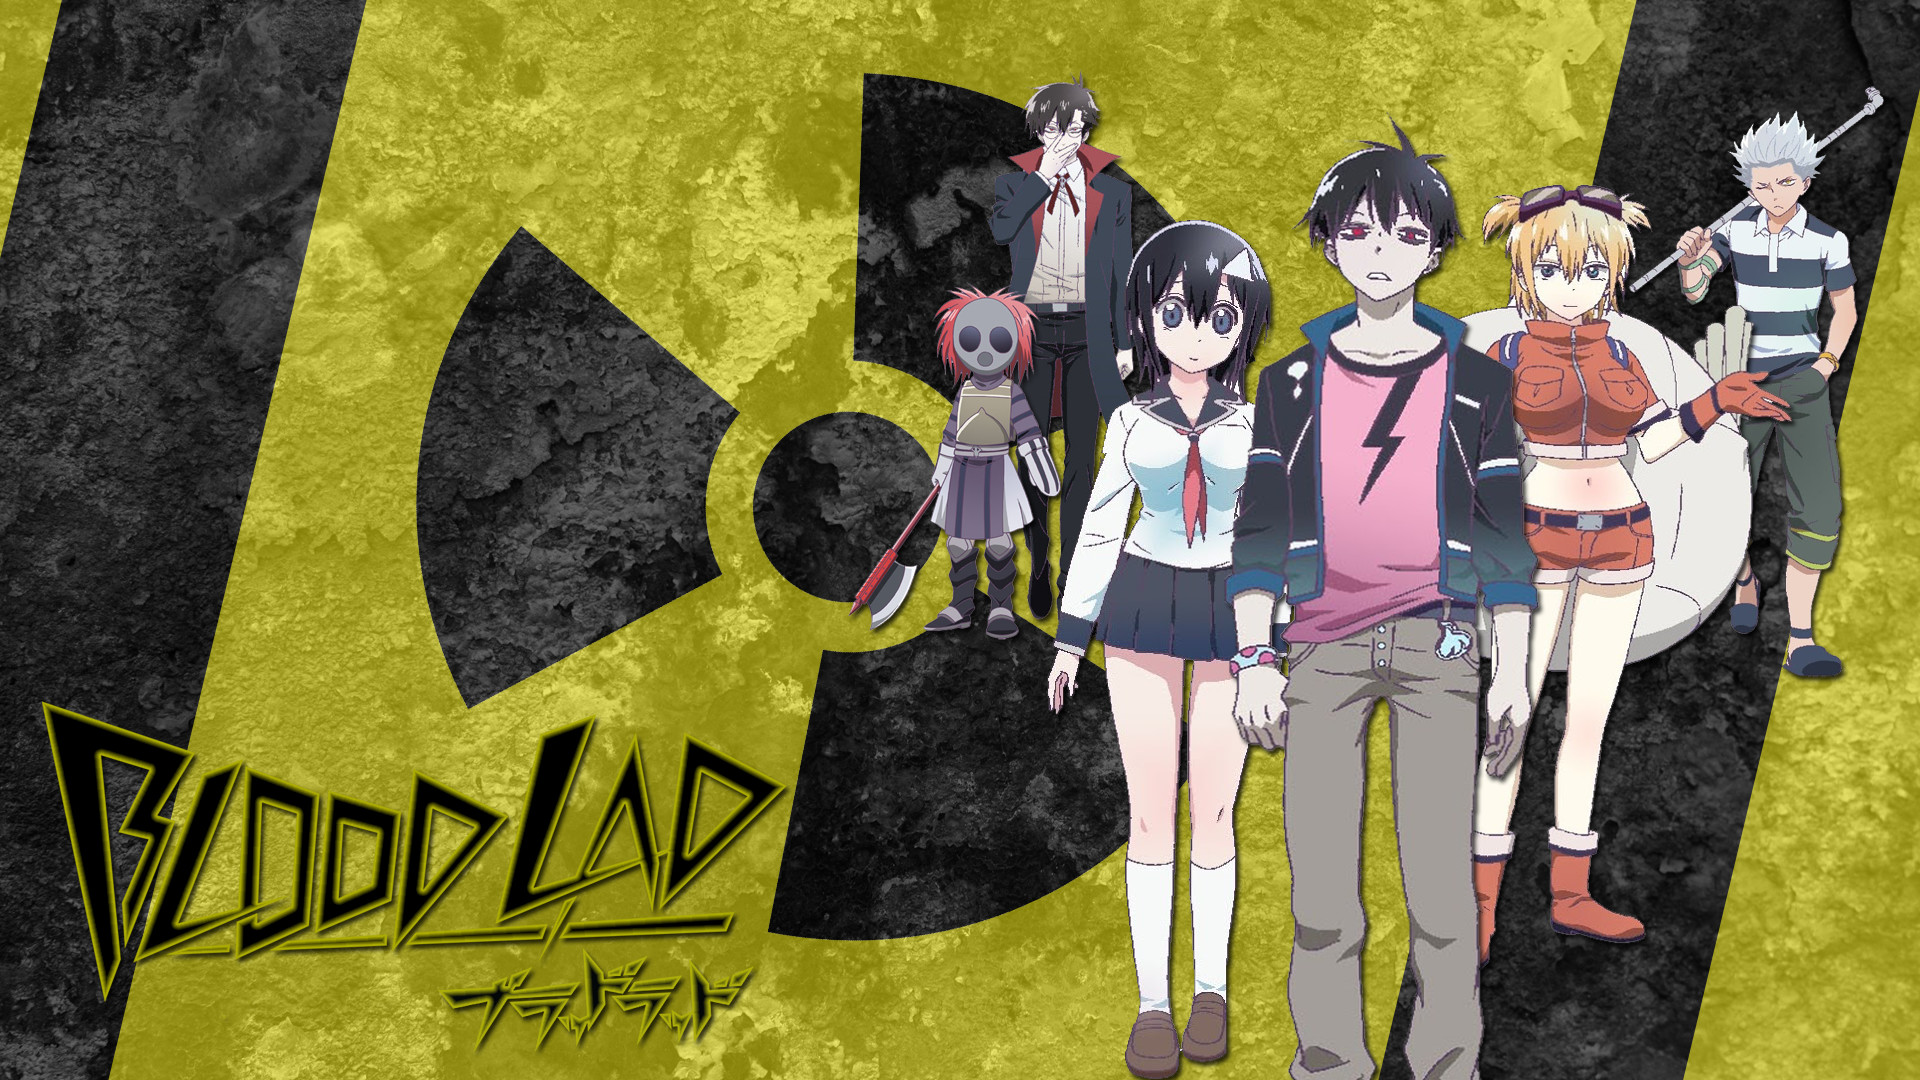 1920x1080 Blood Lad Wallpaper by TheSugarbear Blood Lad Wallpaper by TheSugarbear